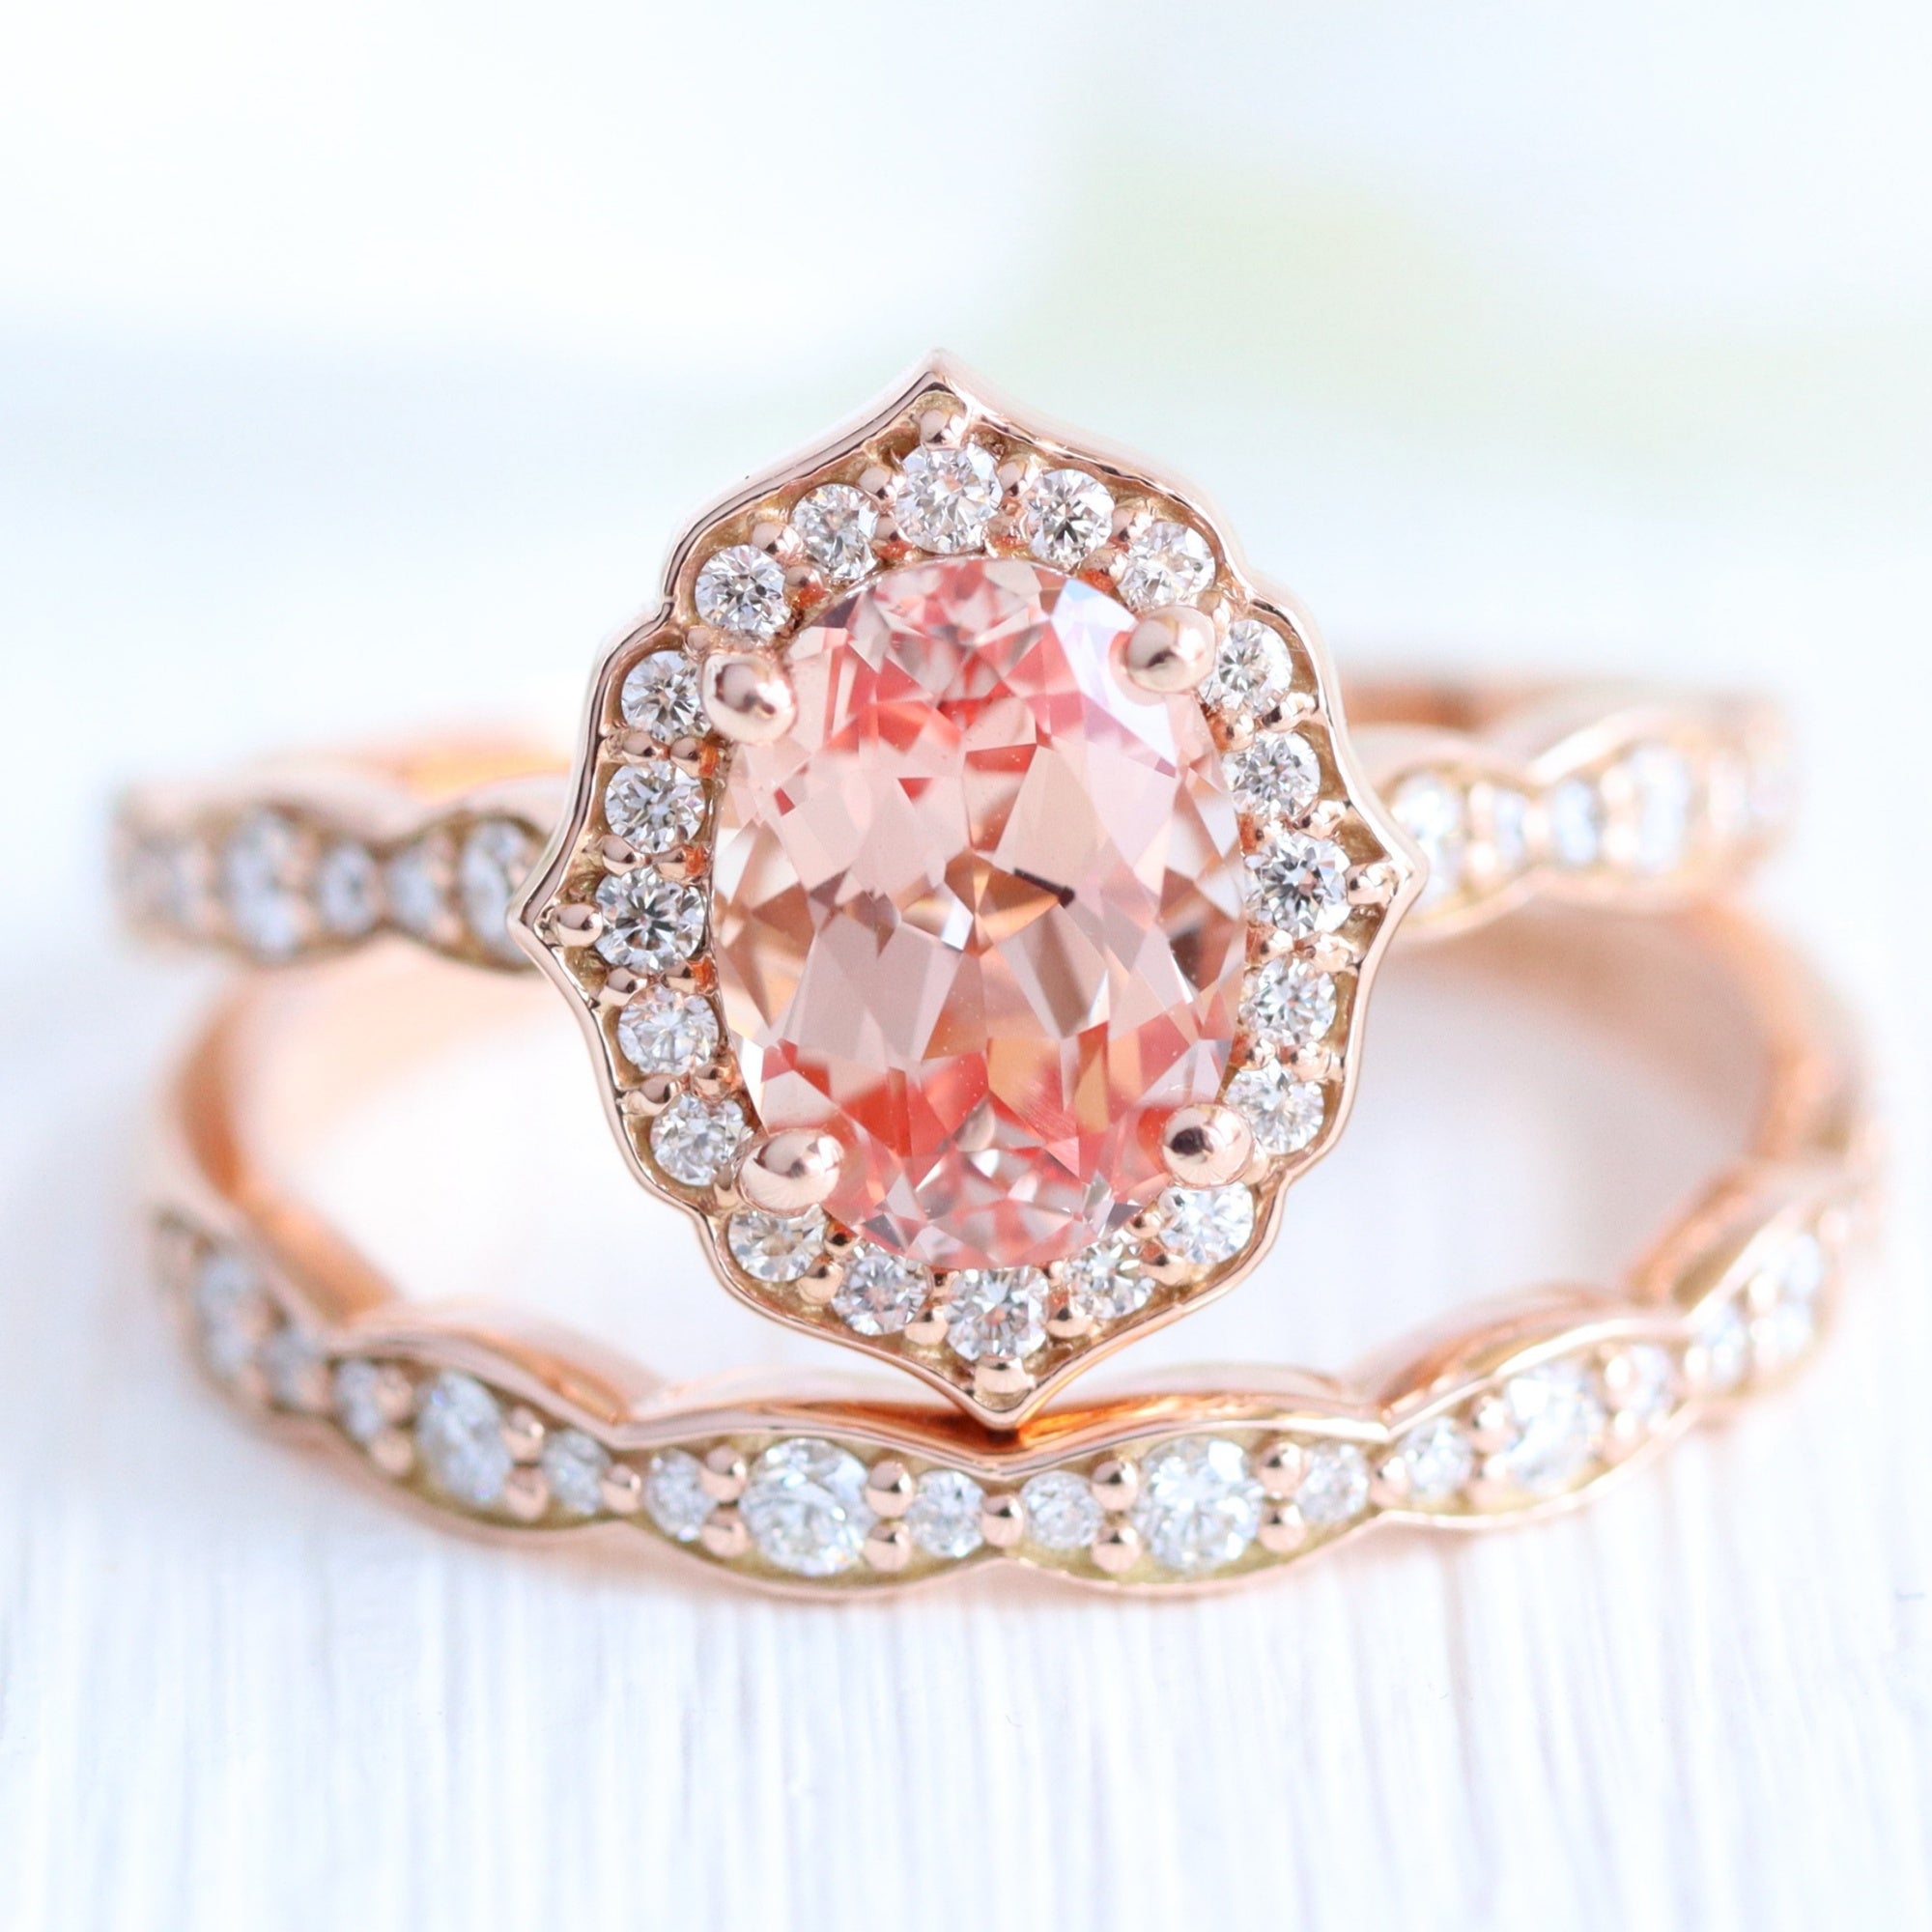 Oval peach sapphire engagement ring stack rose gold vintage halo diamond sapphire ring la more design jewelry